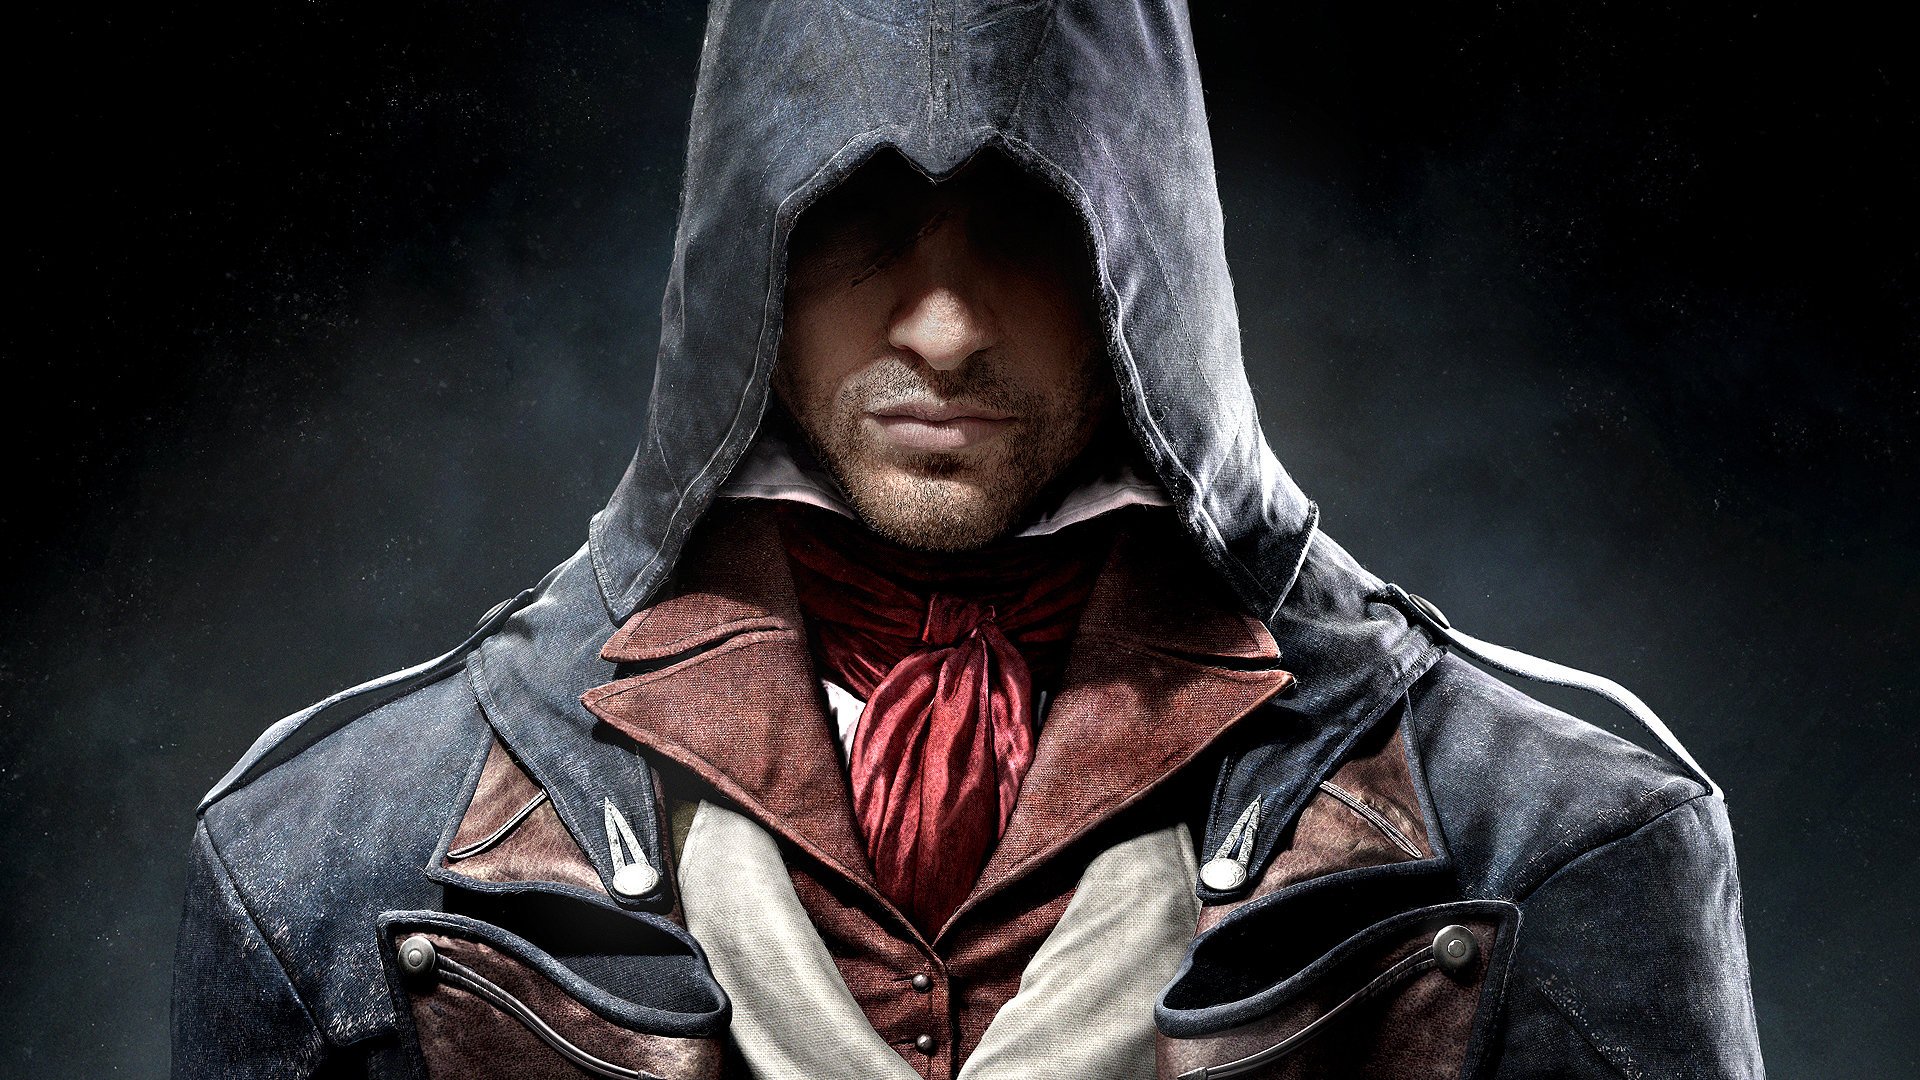 coin-op-amusements-news-assassin-s-creed-attractions-for-saudi-arabia